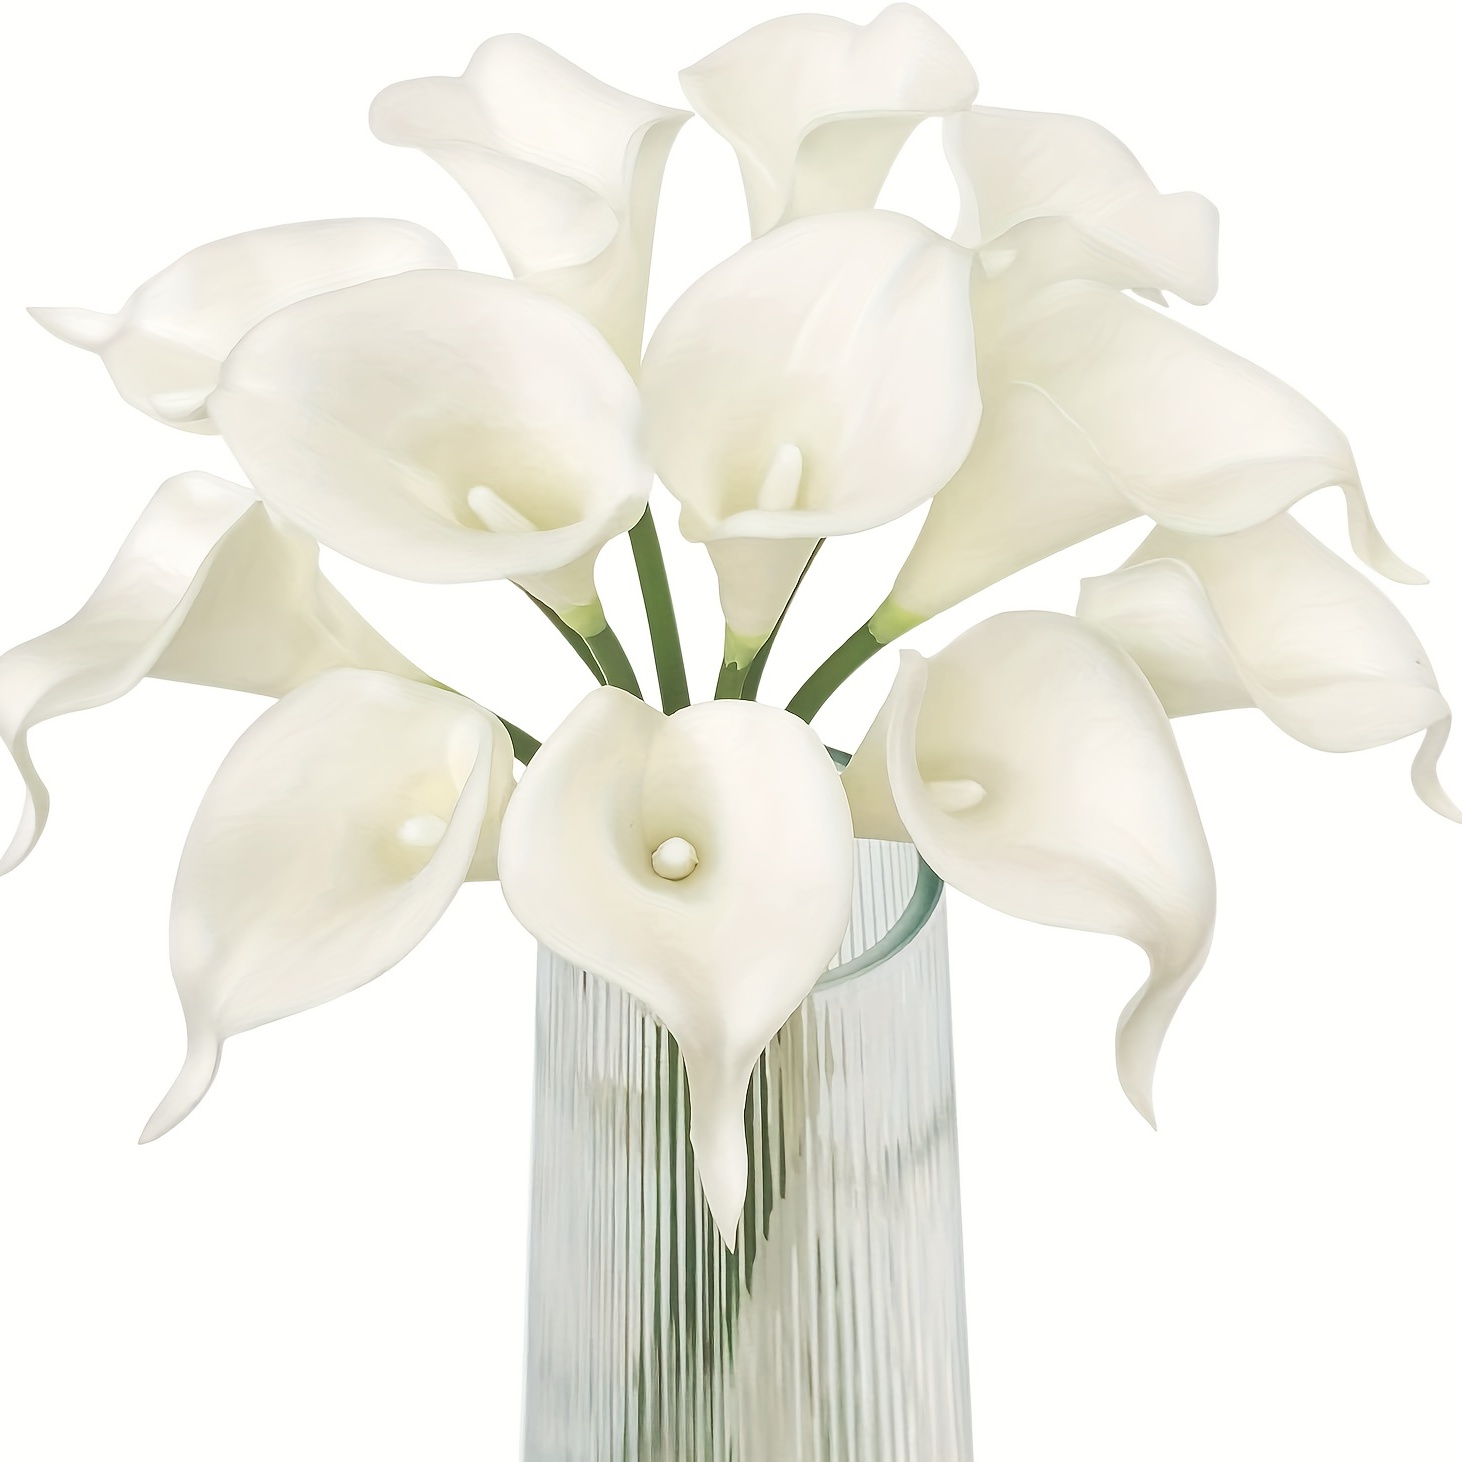 Tifuly 24pcs Calla Lily Bridal Wedding Bouquet Latex Real Touch Artificial  Flowers Arrangement for Home Office Party Decor(Black and White) :  : Home